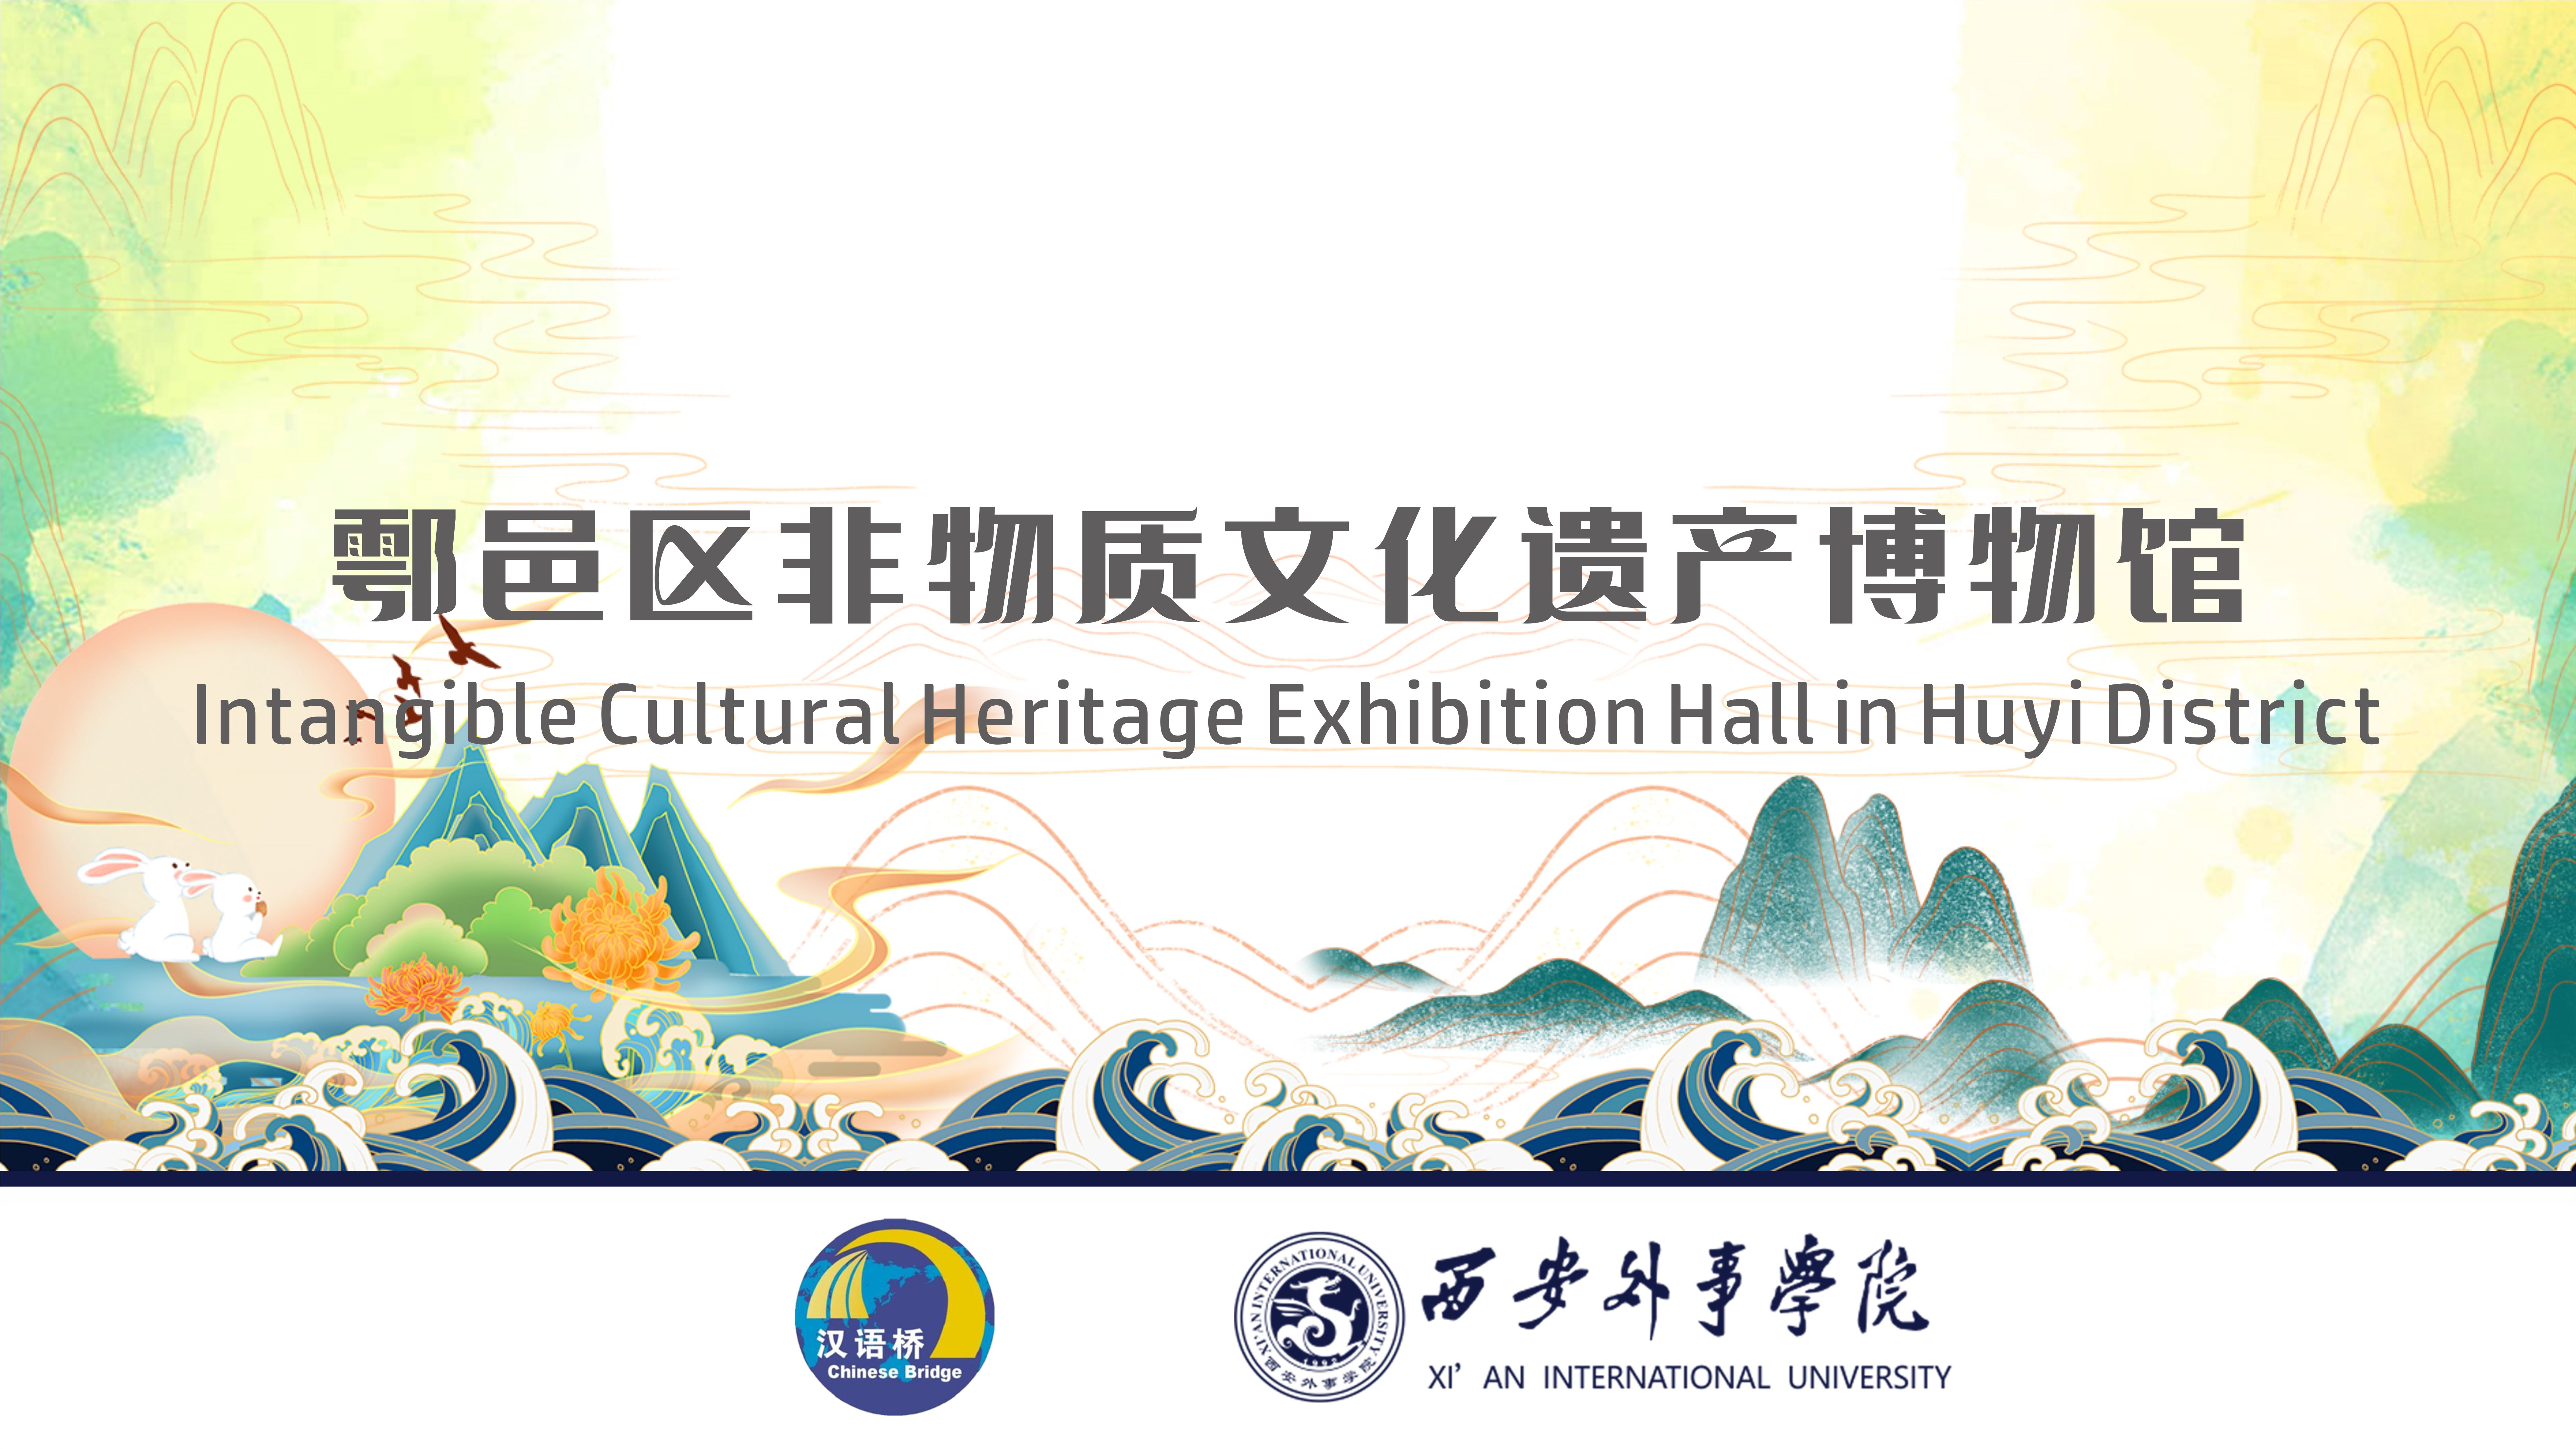 Intangible Cultural Heritage Exhibition Hall in Huyi District